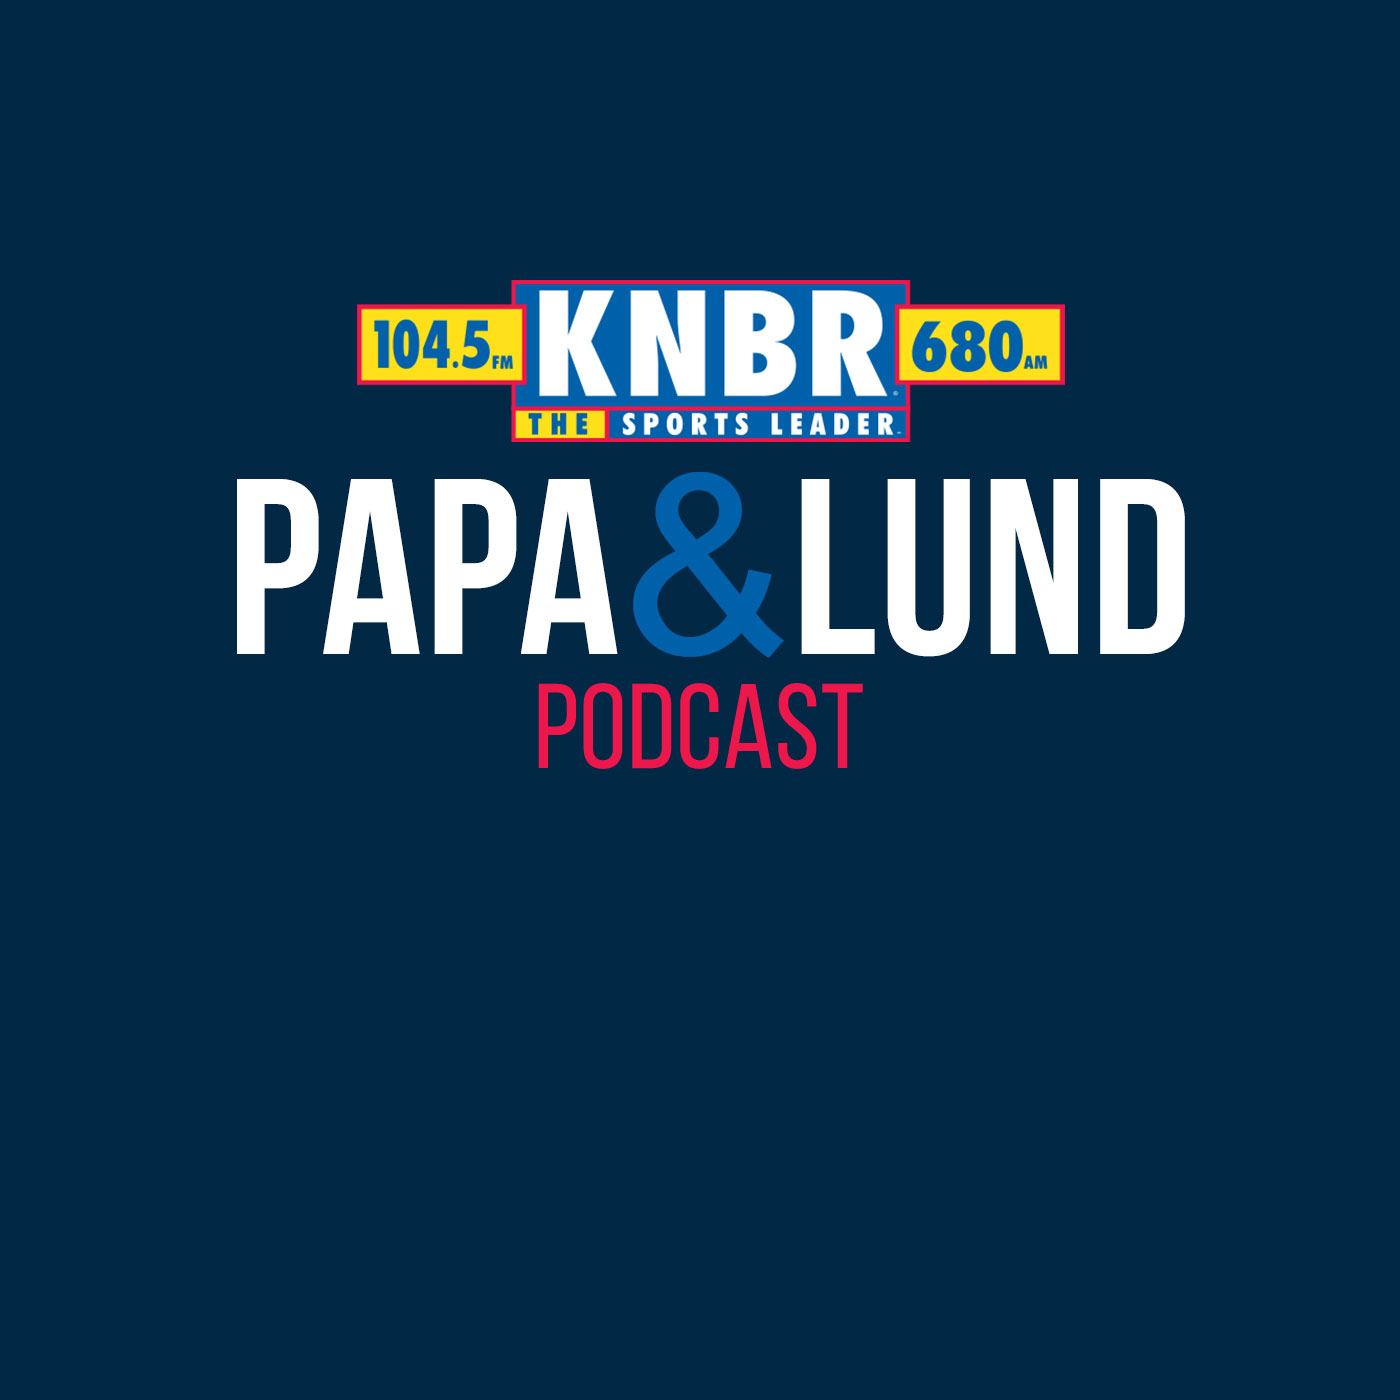 6-20 Ron Wotus joins Papa & Lund to discuss the development of Luis Matos and Patrick Bailey in the minors to now being big leaguers